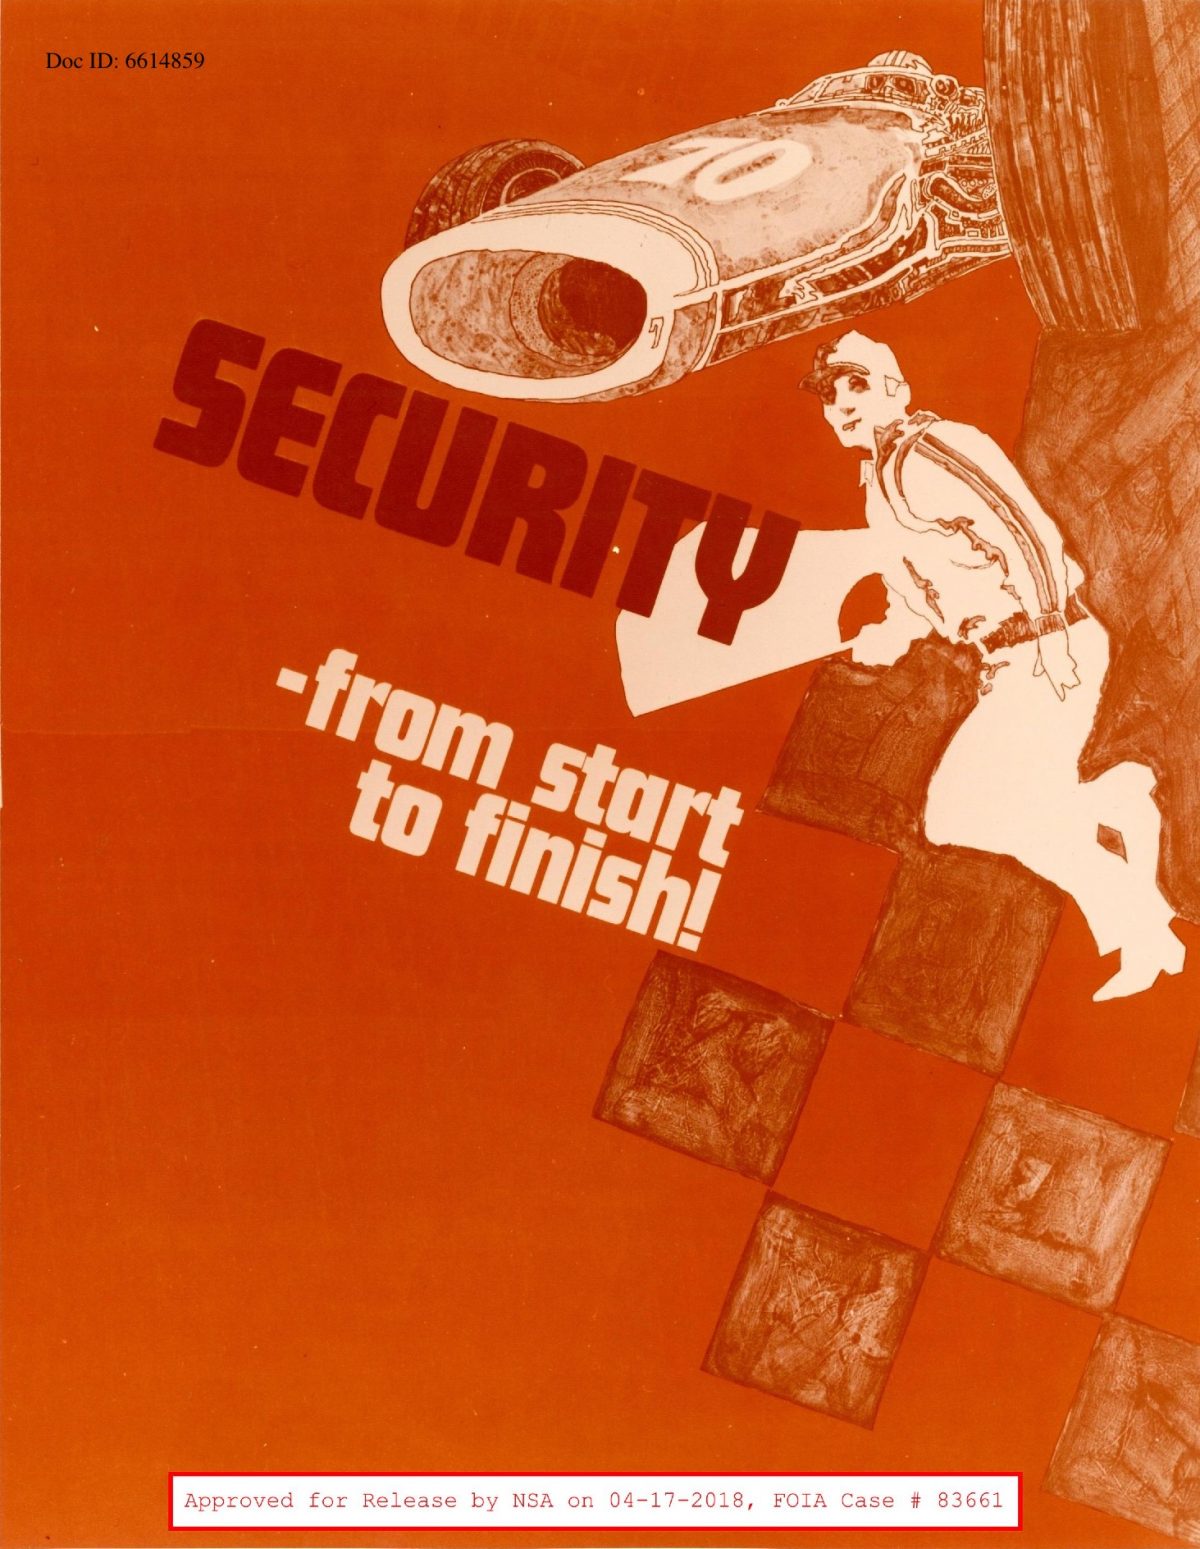 NSA posters 1950s 1960s